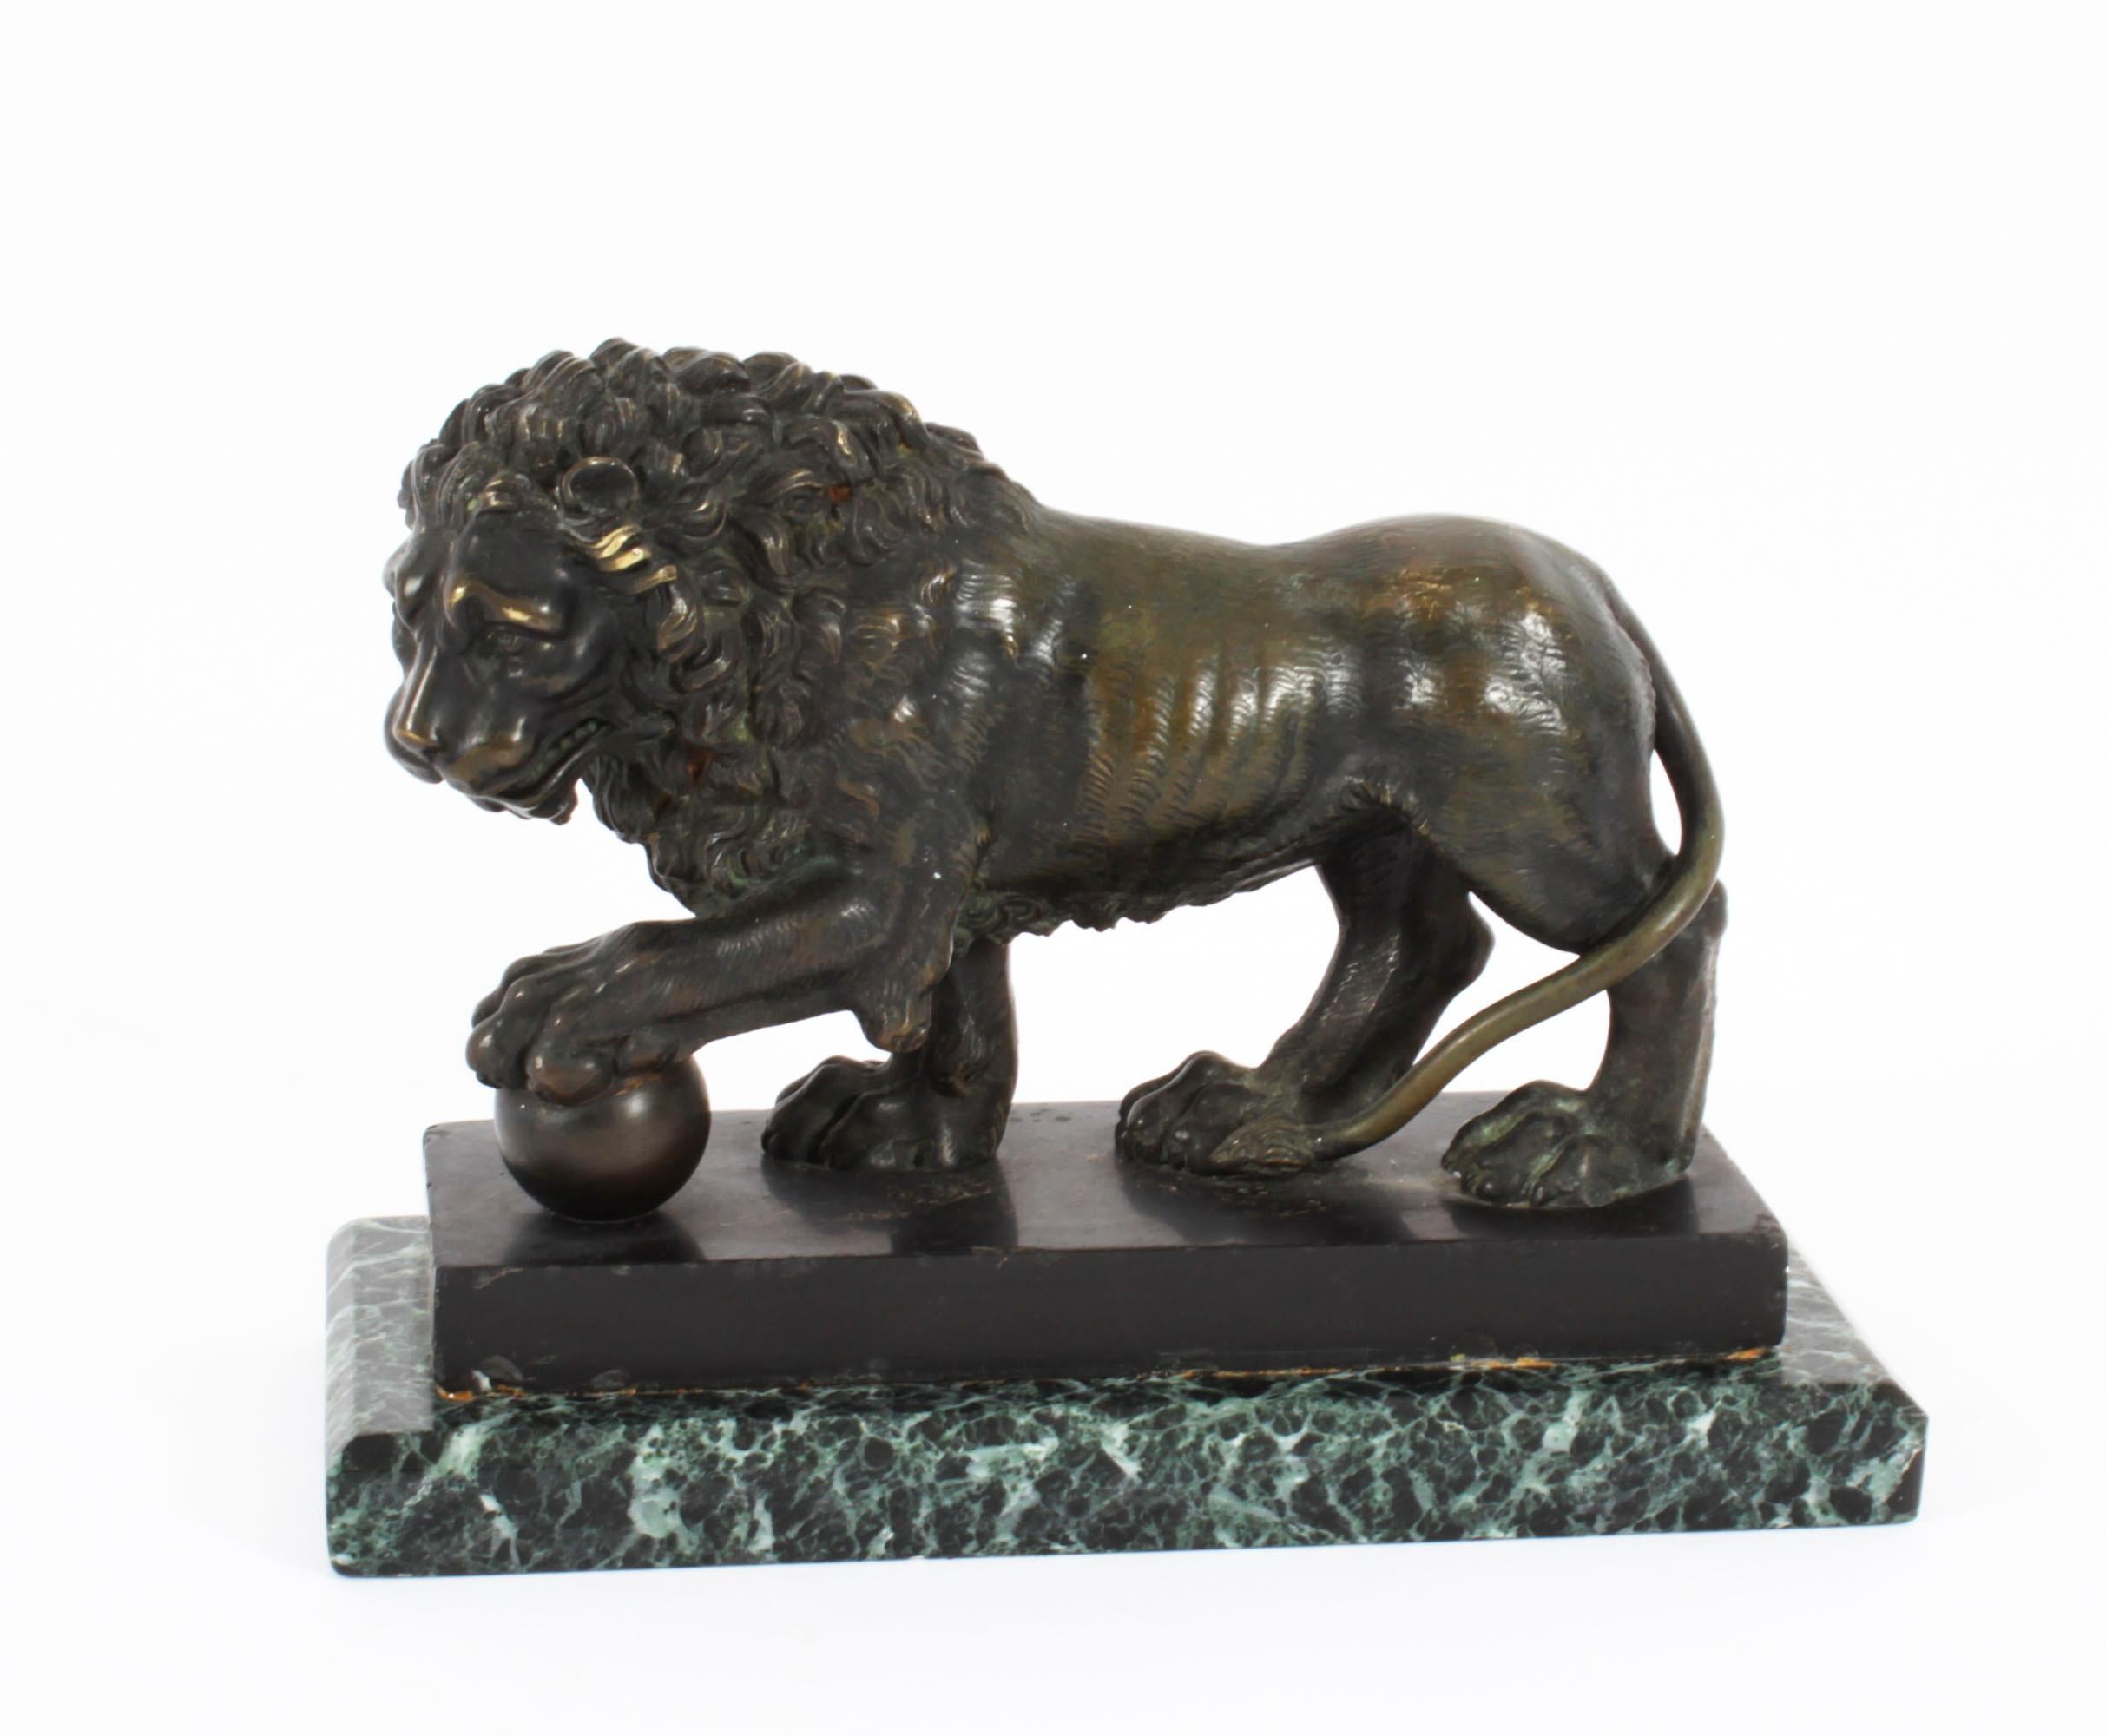 This is a beautiful antique French Grand Tour bronze sculpture of The Medici Lion, circa 1870 in date.
 
The sculptures depict a standing male lion looking to one side with a sphere or ball under one paw, raised on a stepped rectangular bronze and